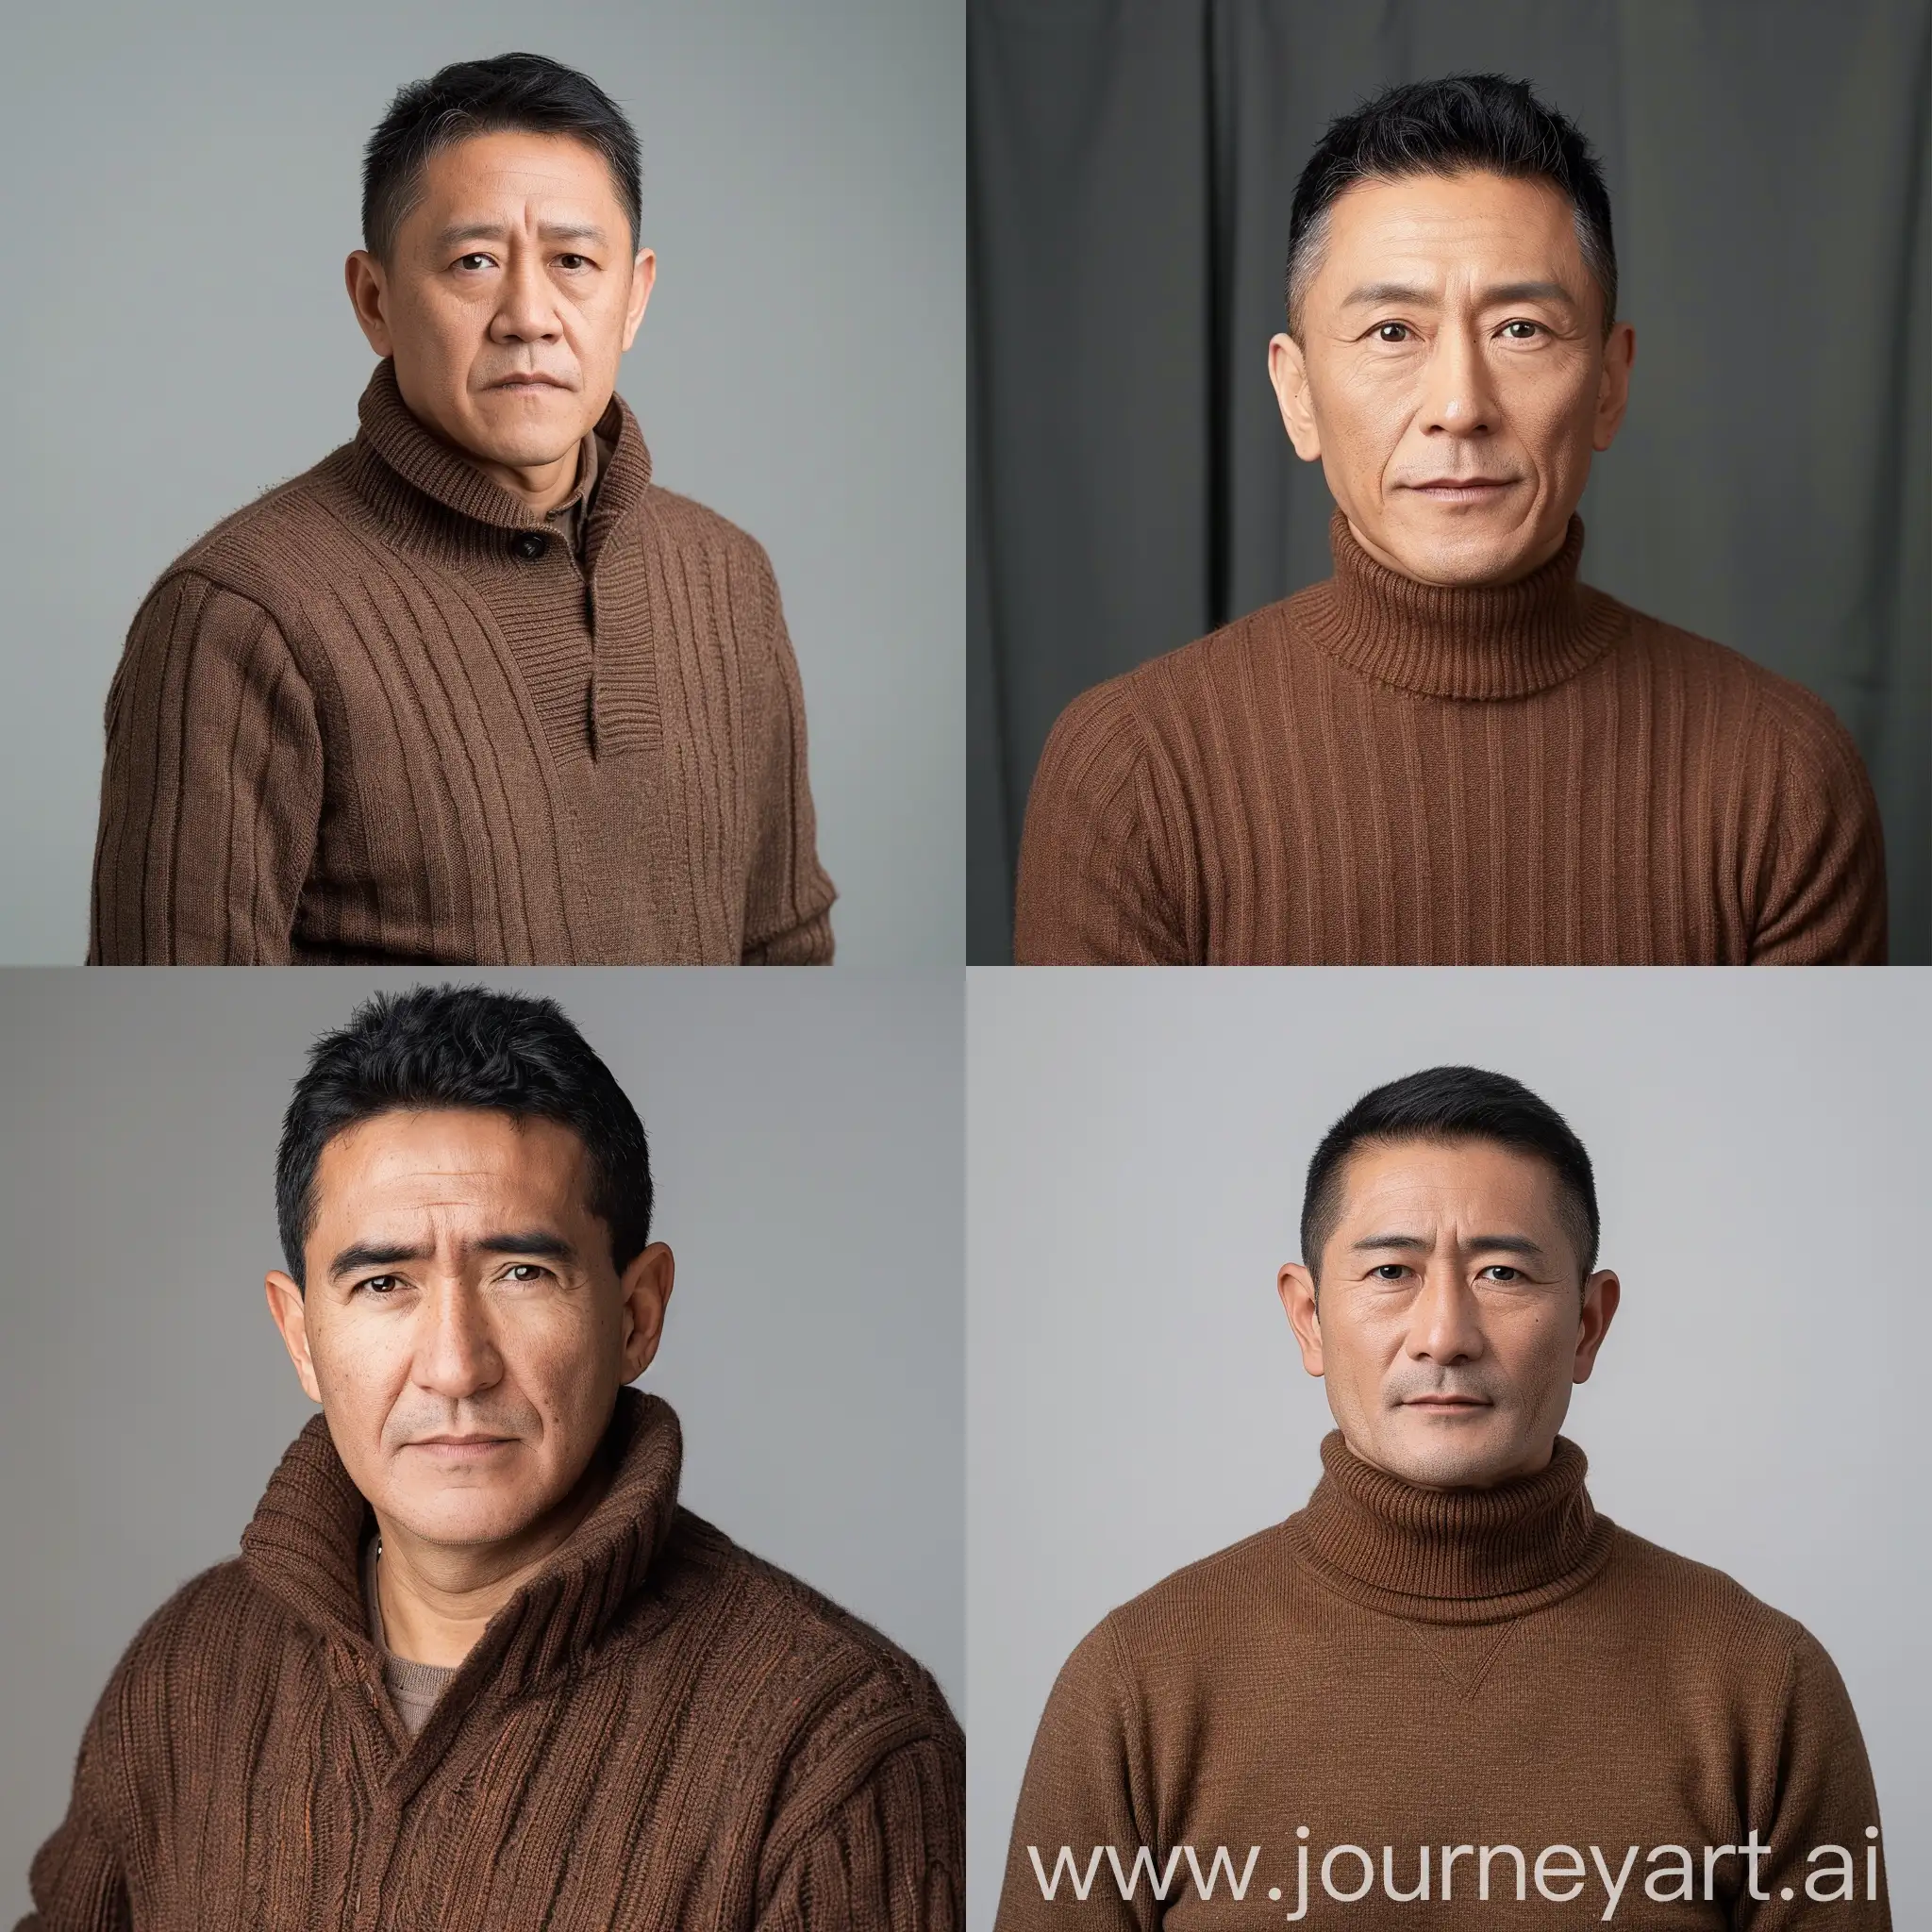 MiddleAged-Man-in-Brown-Sweater-and-Short-Black-Hair-Portrait